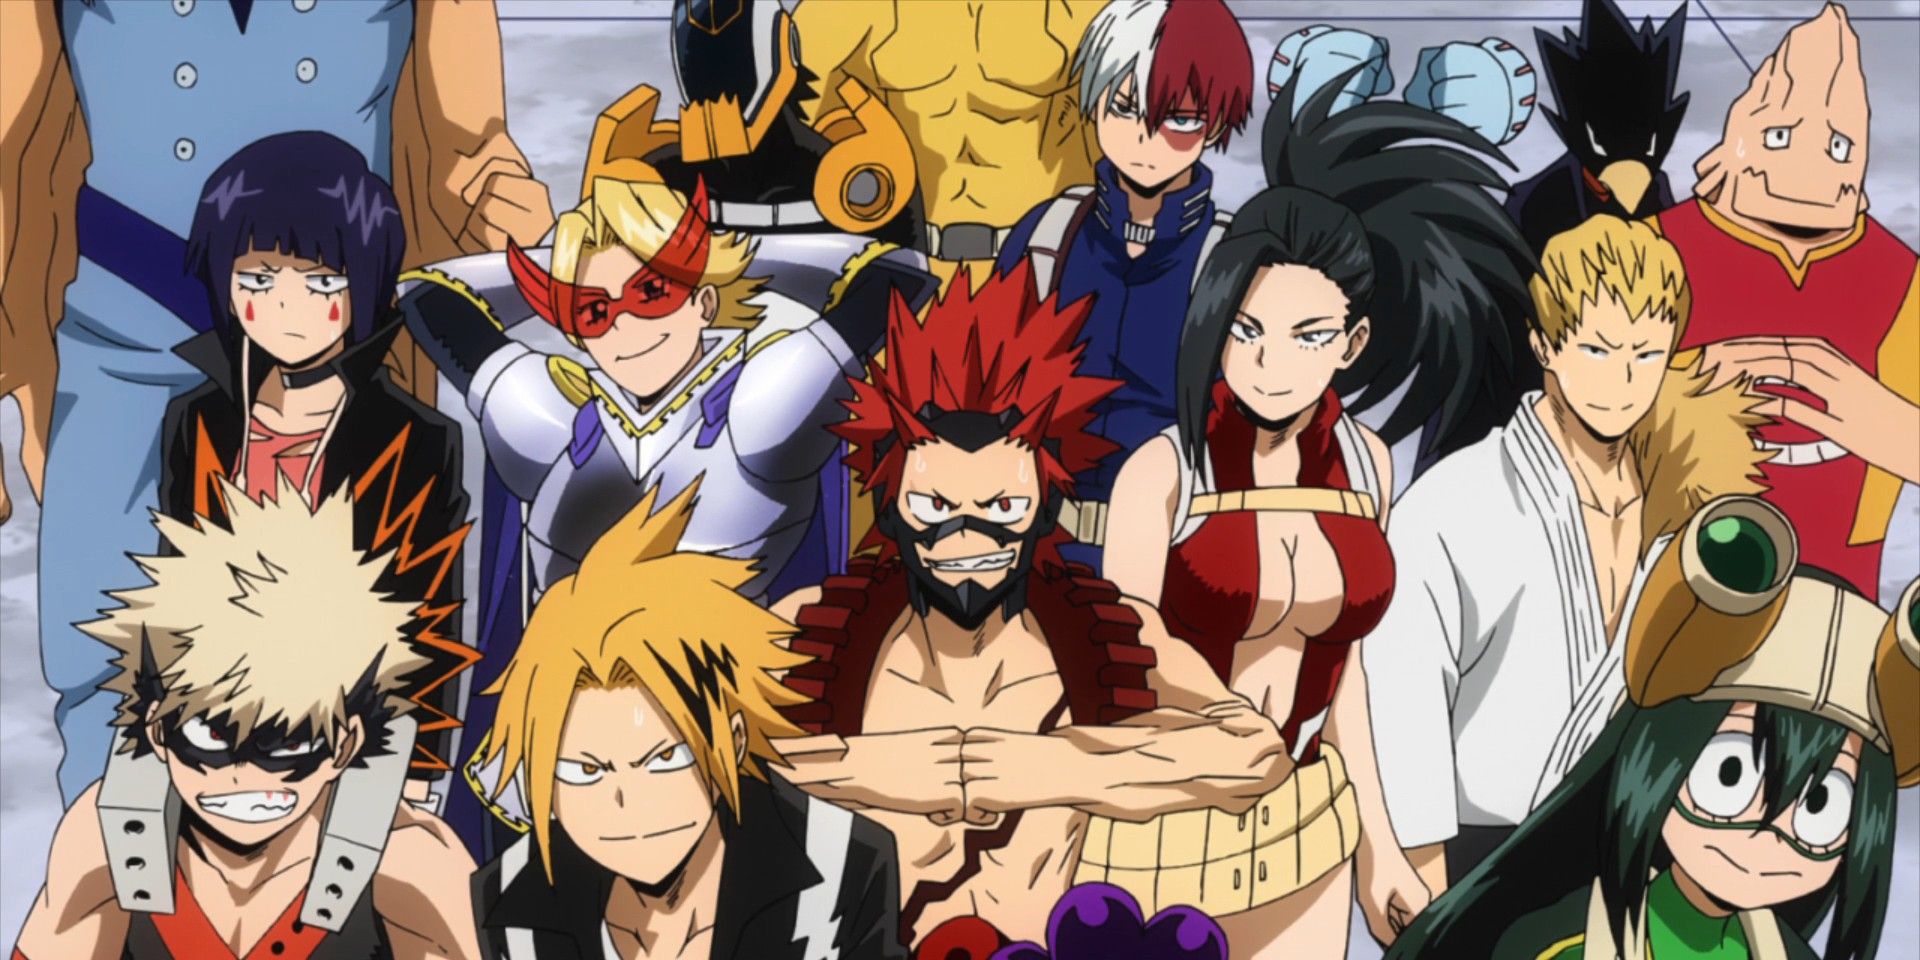 Class 1-A from My Hero Academia